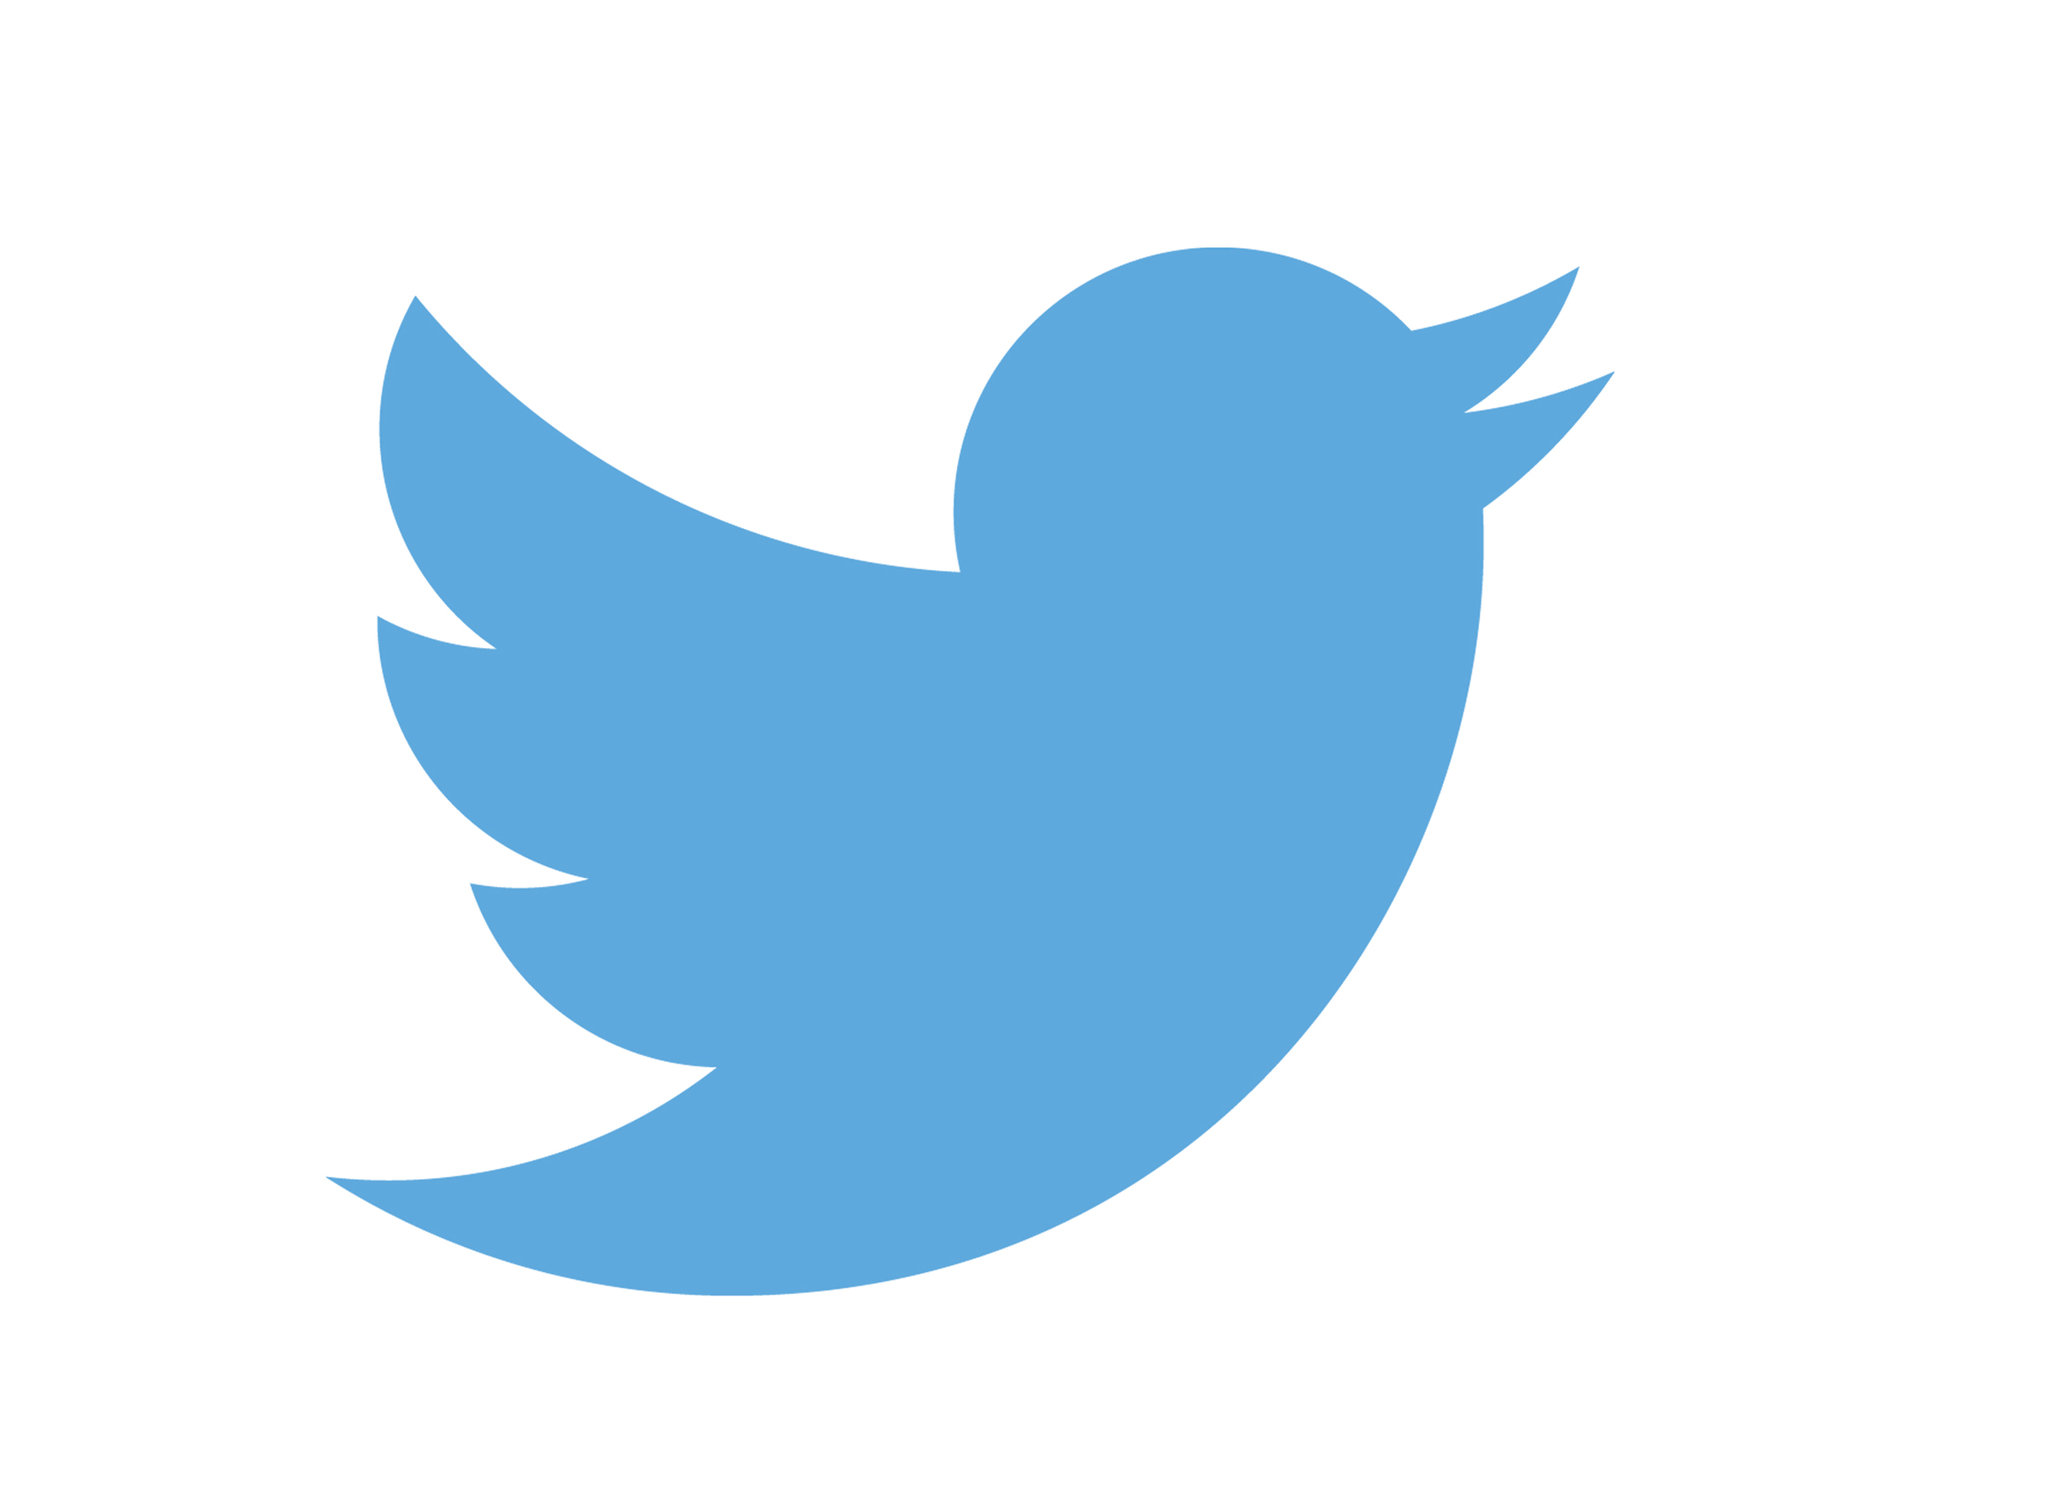 Twitter logo - Link to HR Twitter page